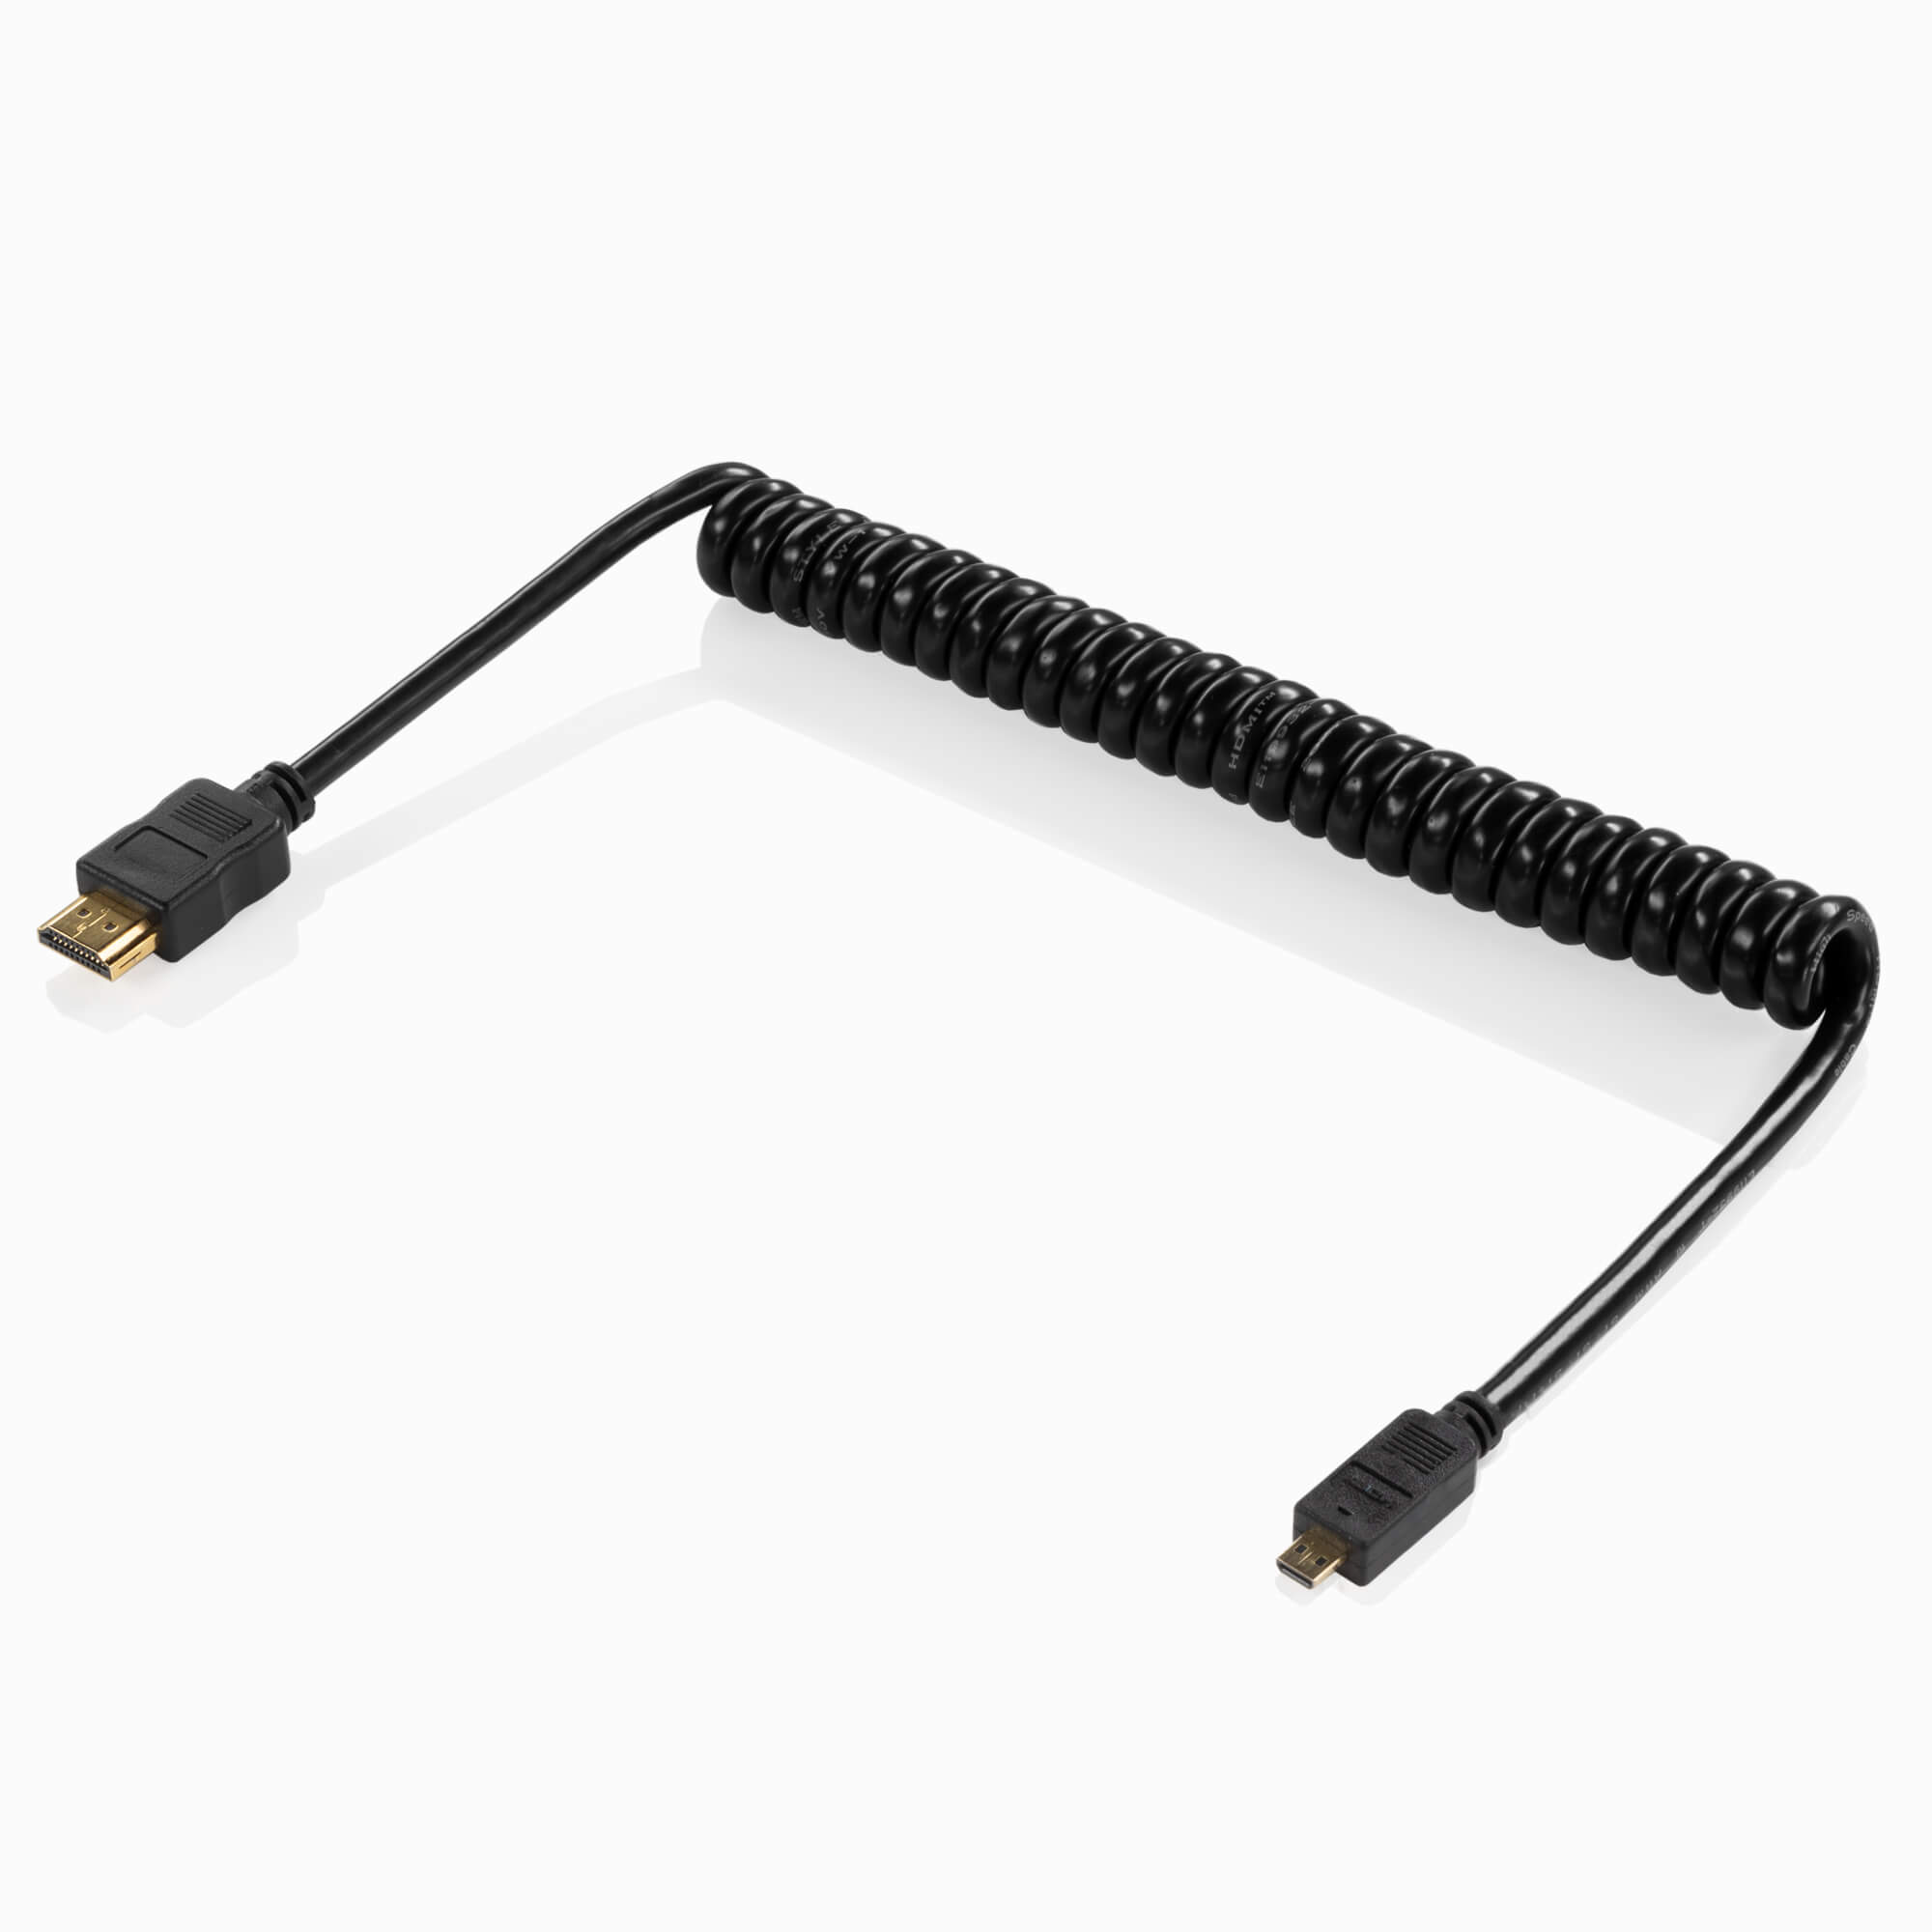 activering mist Dusver SHAPE 4k 2.0 HDMI to micro HDMI male coiled cable - SHAPE